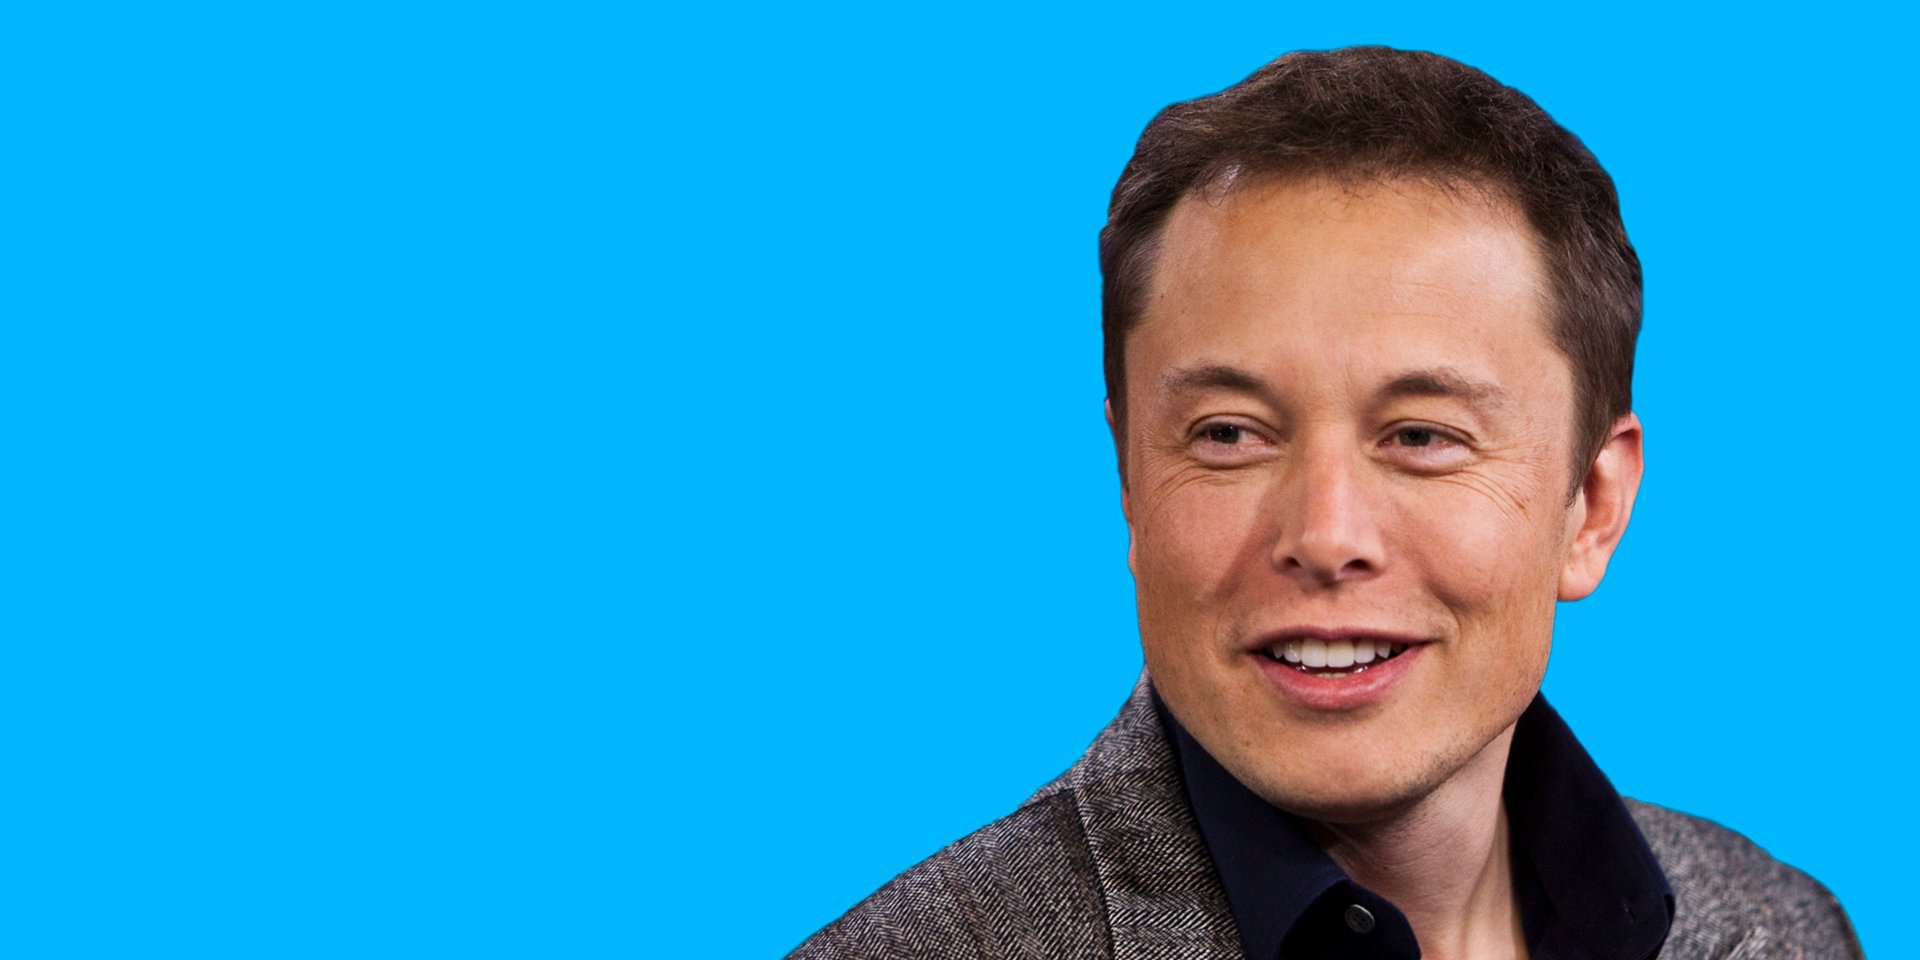 Taboola Ad Example 53645 - How Tesla CEO Elon Musk Makes And Spends His $19.2 Billion